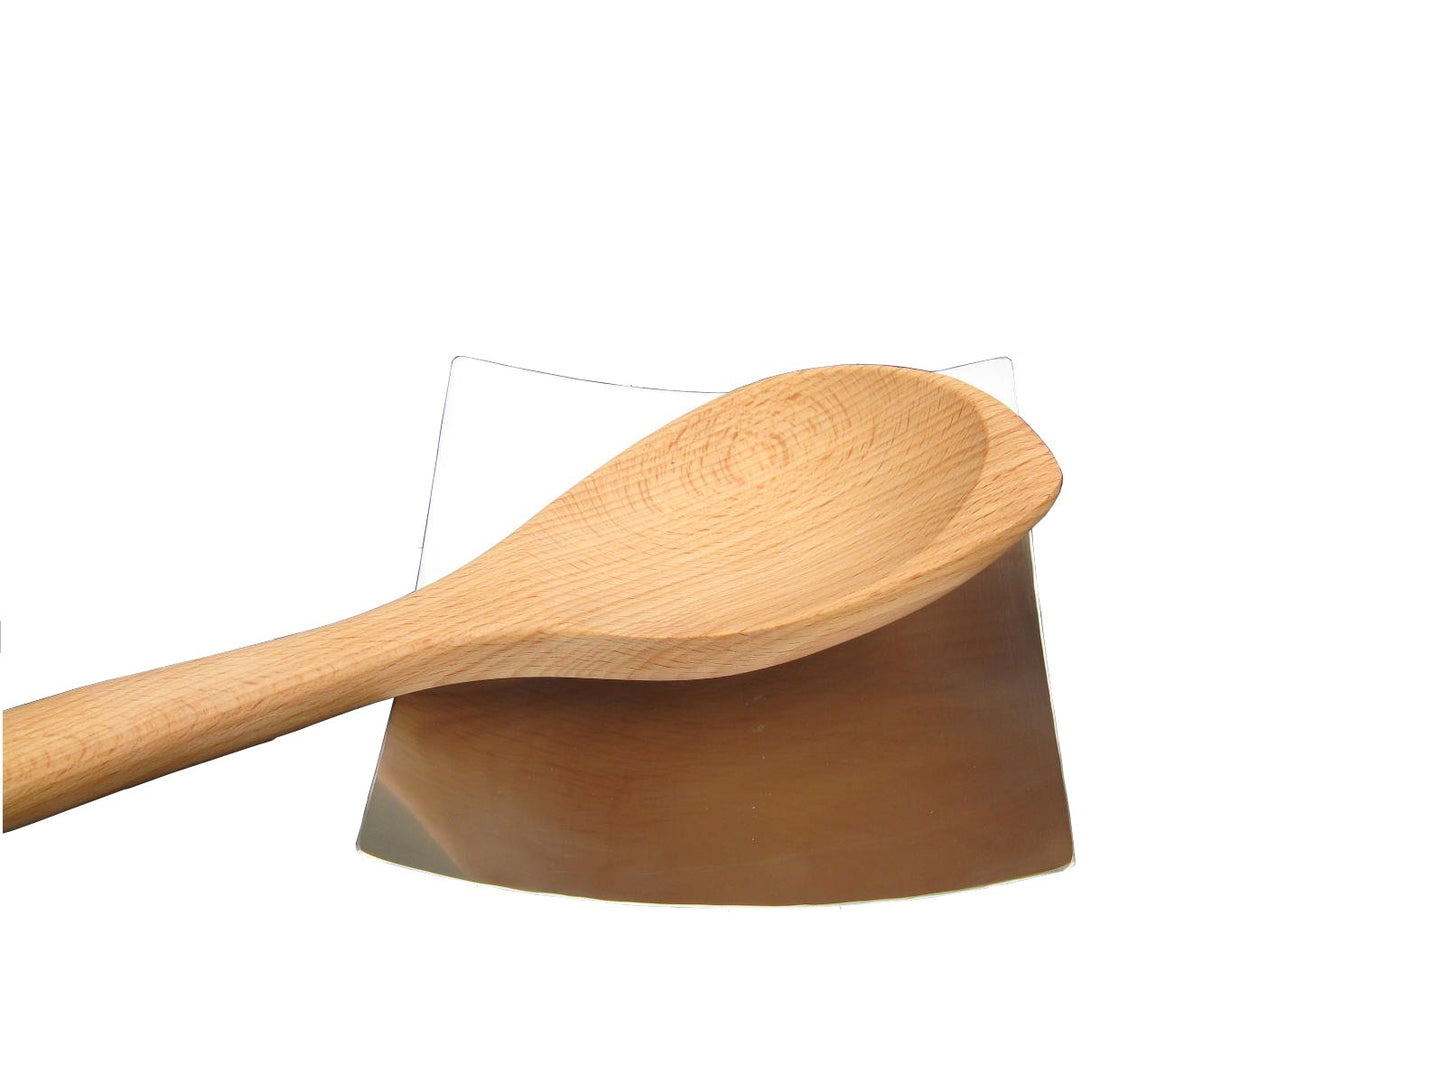 Zojila.com : Calicut Spoon Rest, Countertop Accessory, Stainless steel Compact Spatula holder : Kitchen & Dining